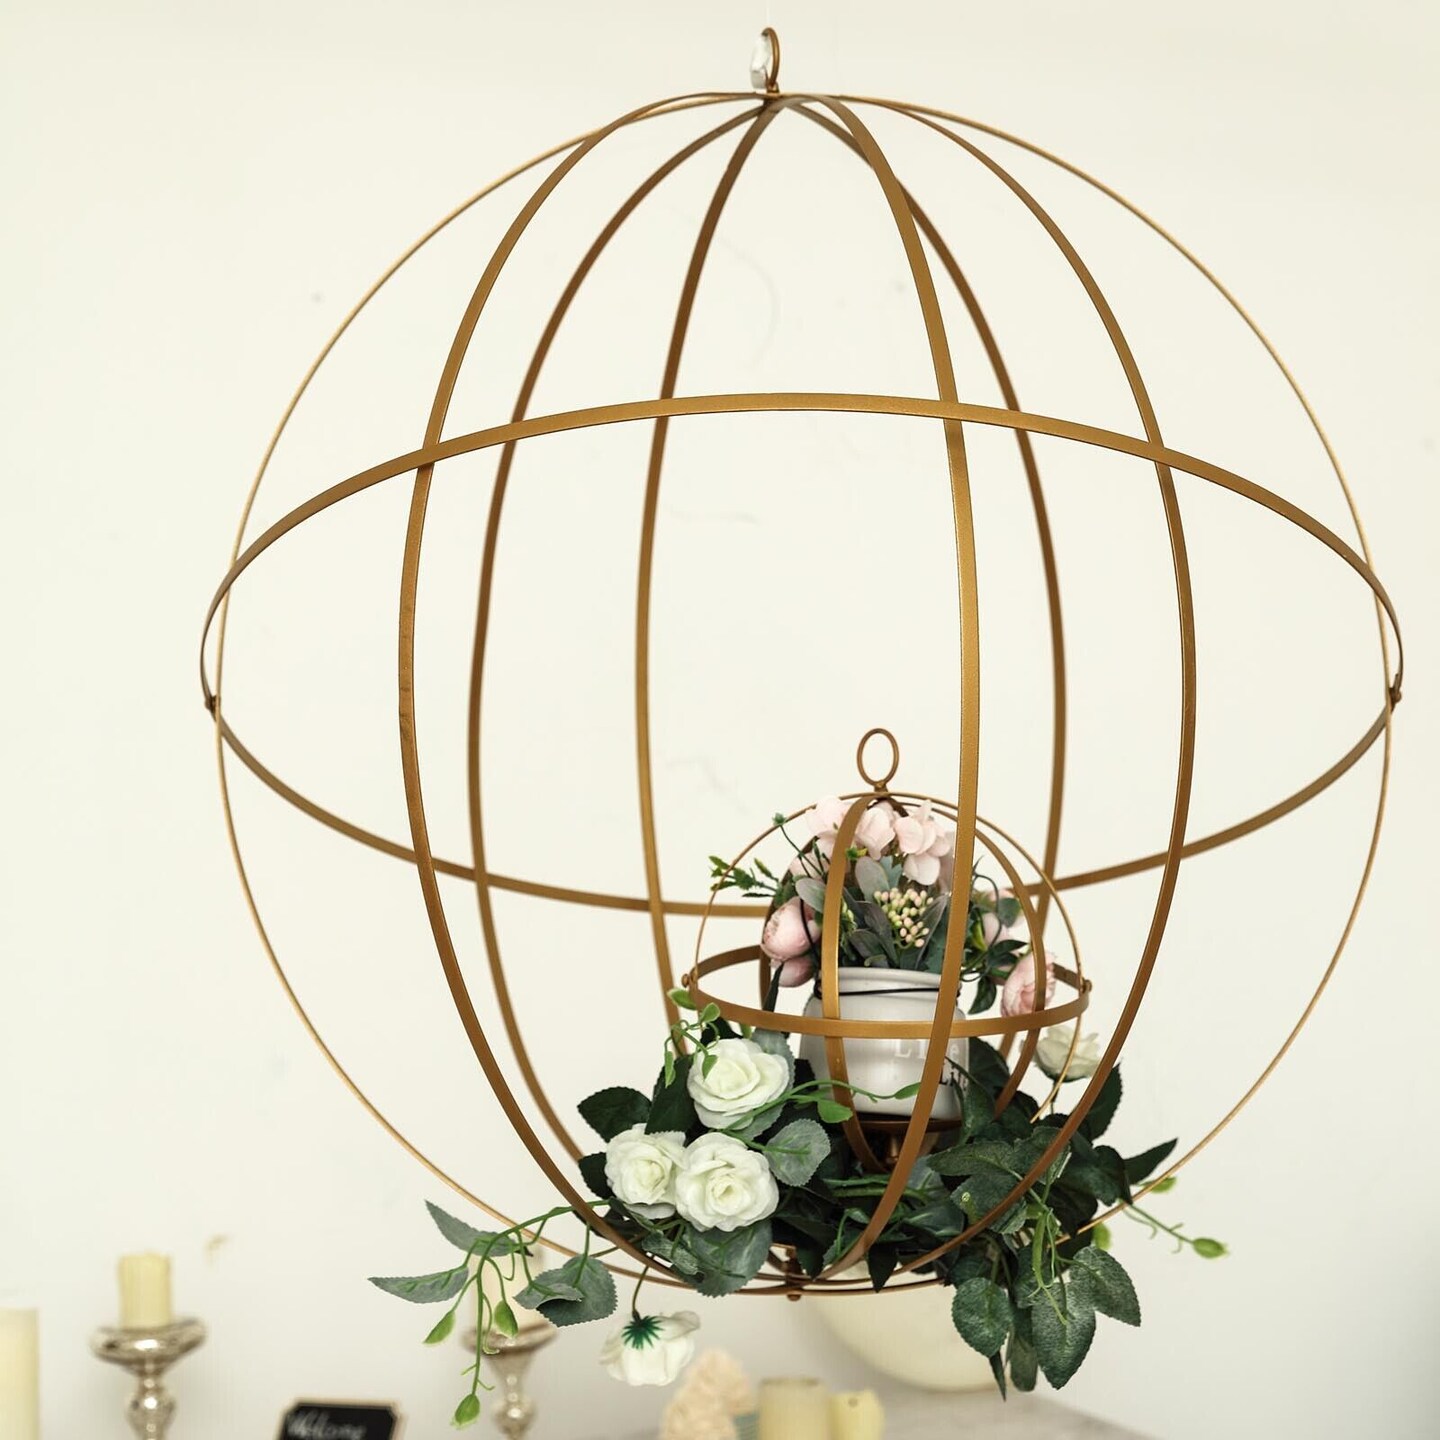 25-Inch Gold Globe Ring Hanging Candle Holder